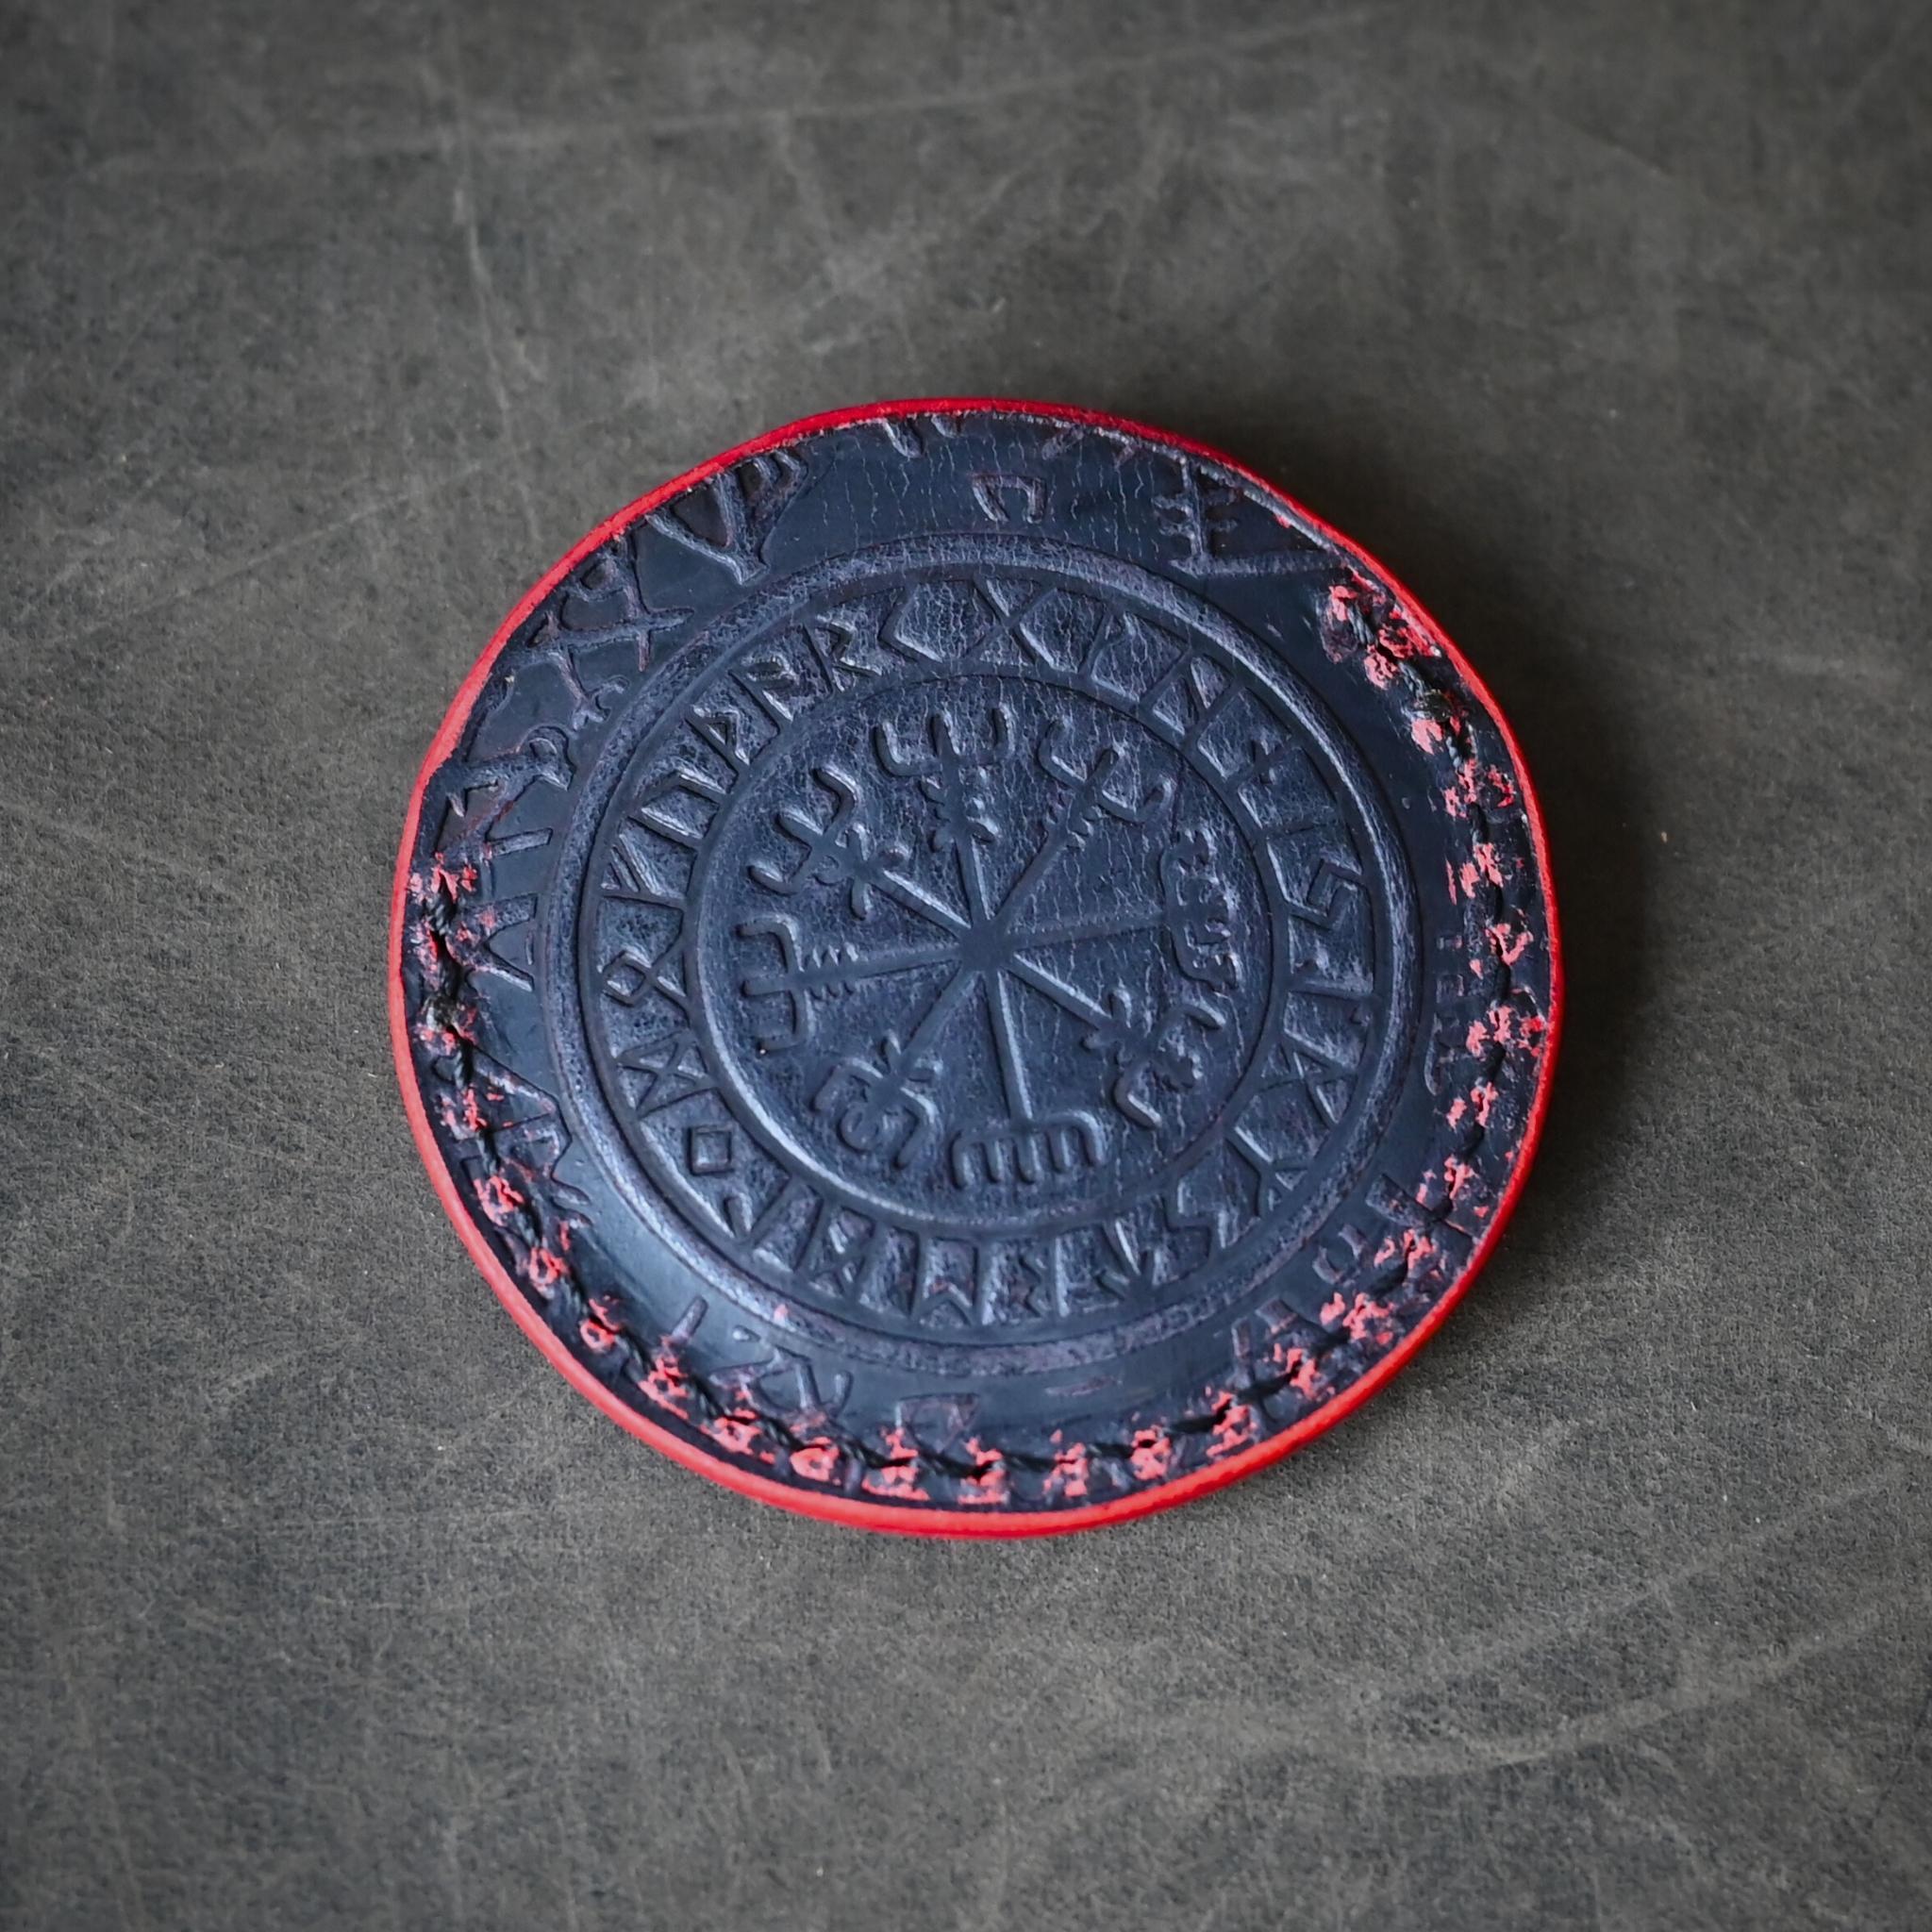 Norse Leather Coin Slips Black Cherry Ghost